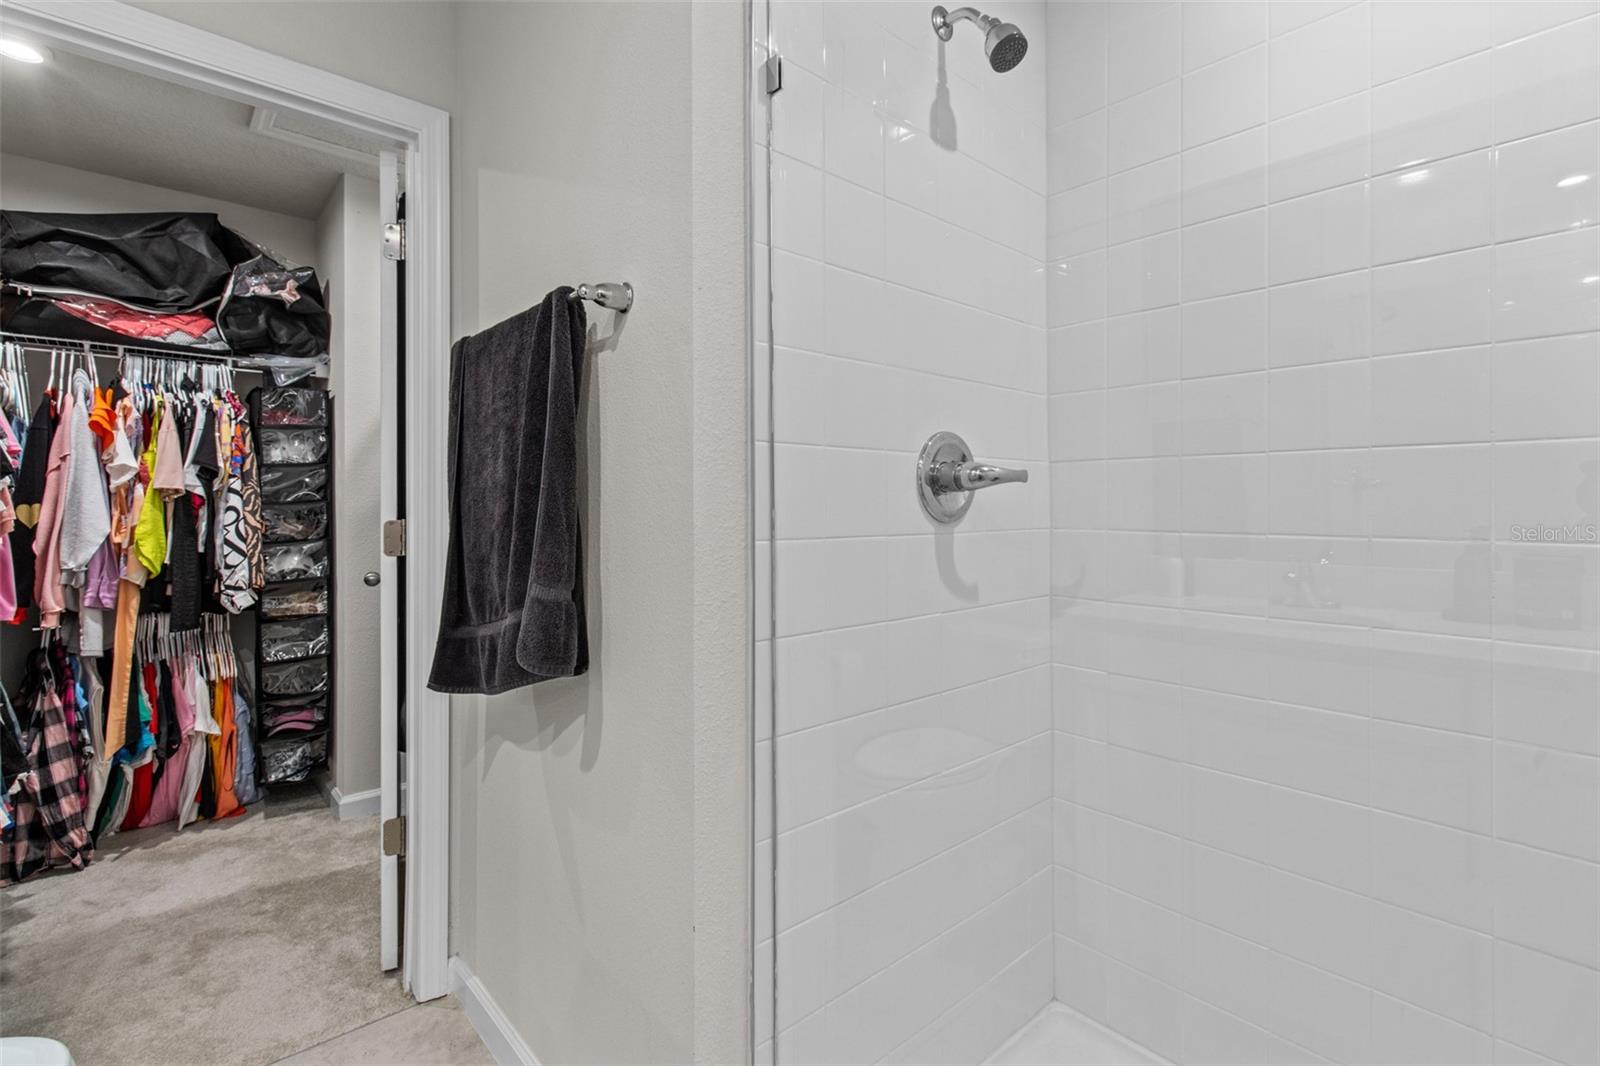 This spacious walk-in closet offers additional space to the right of the closet door.